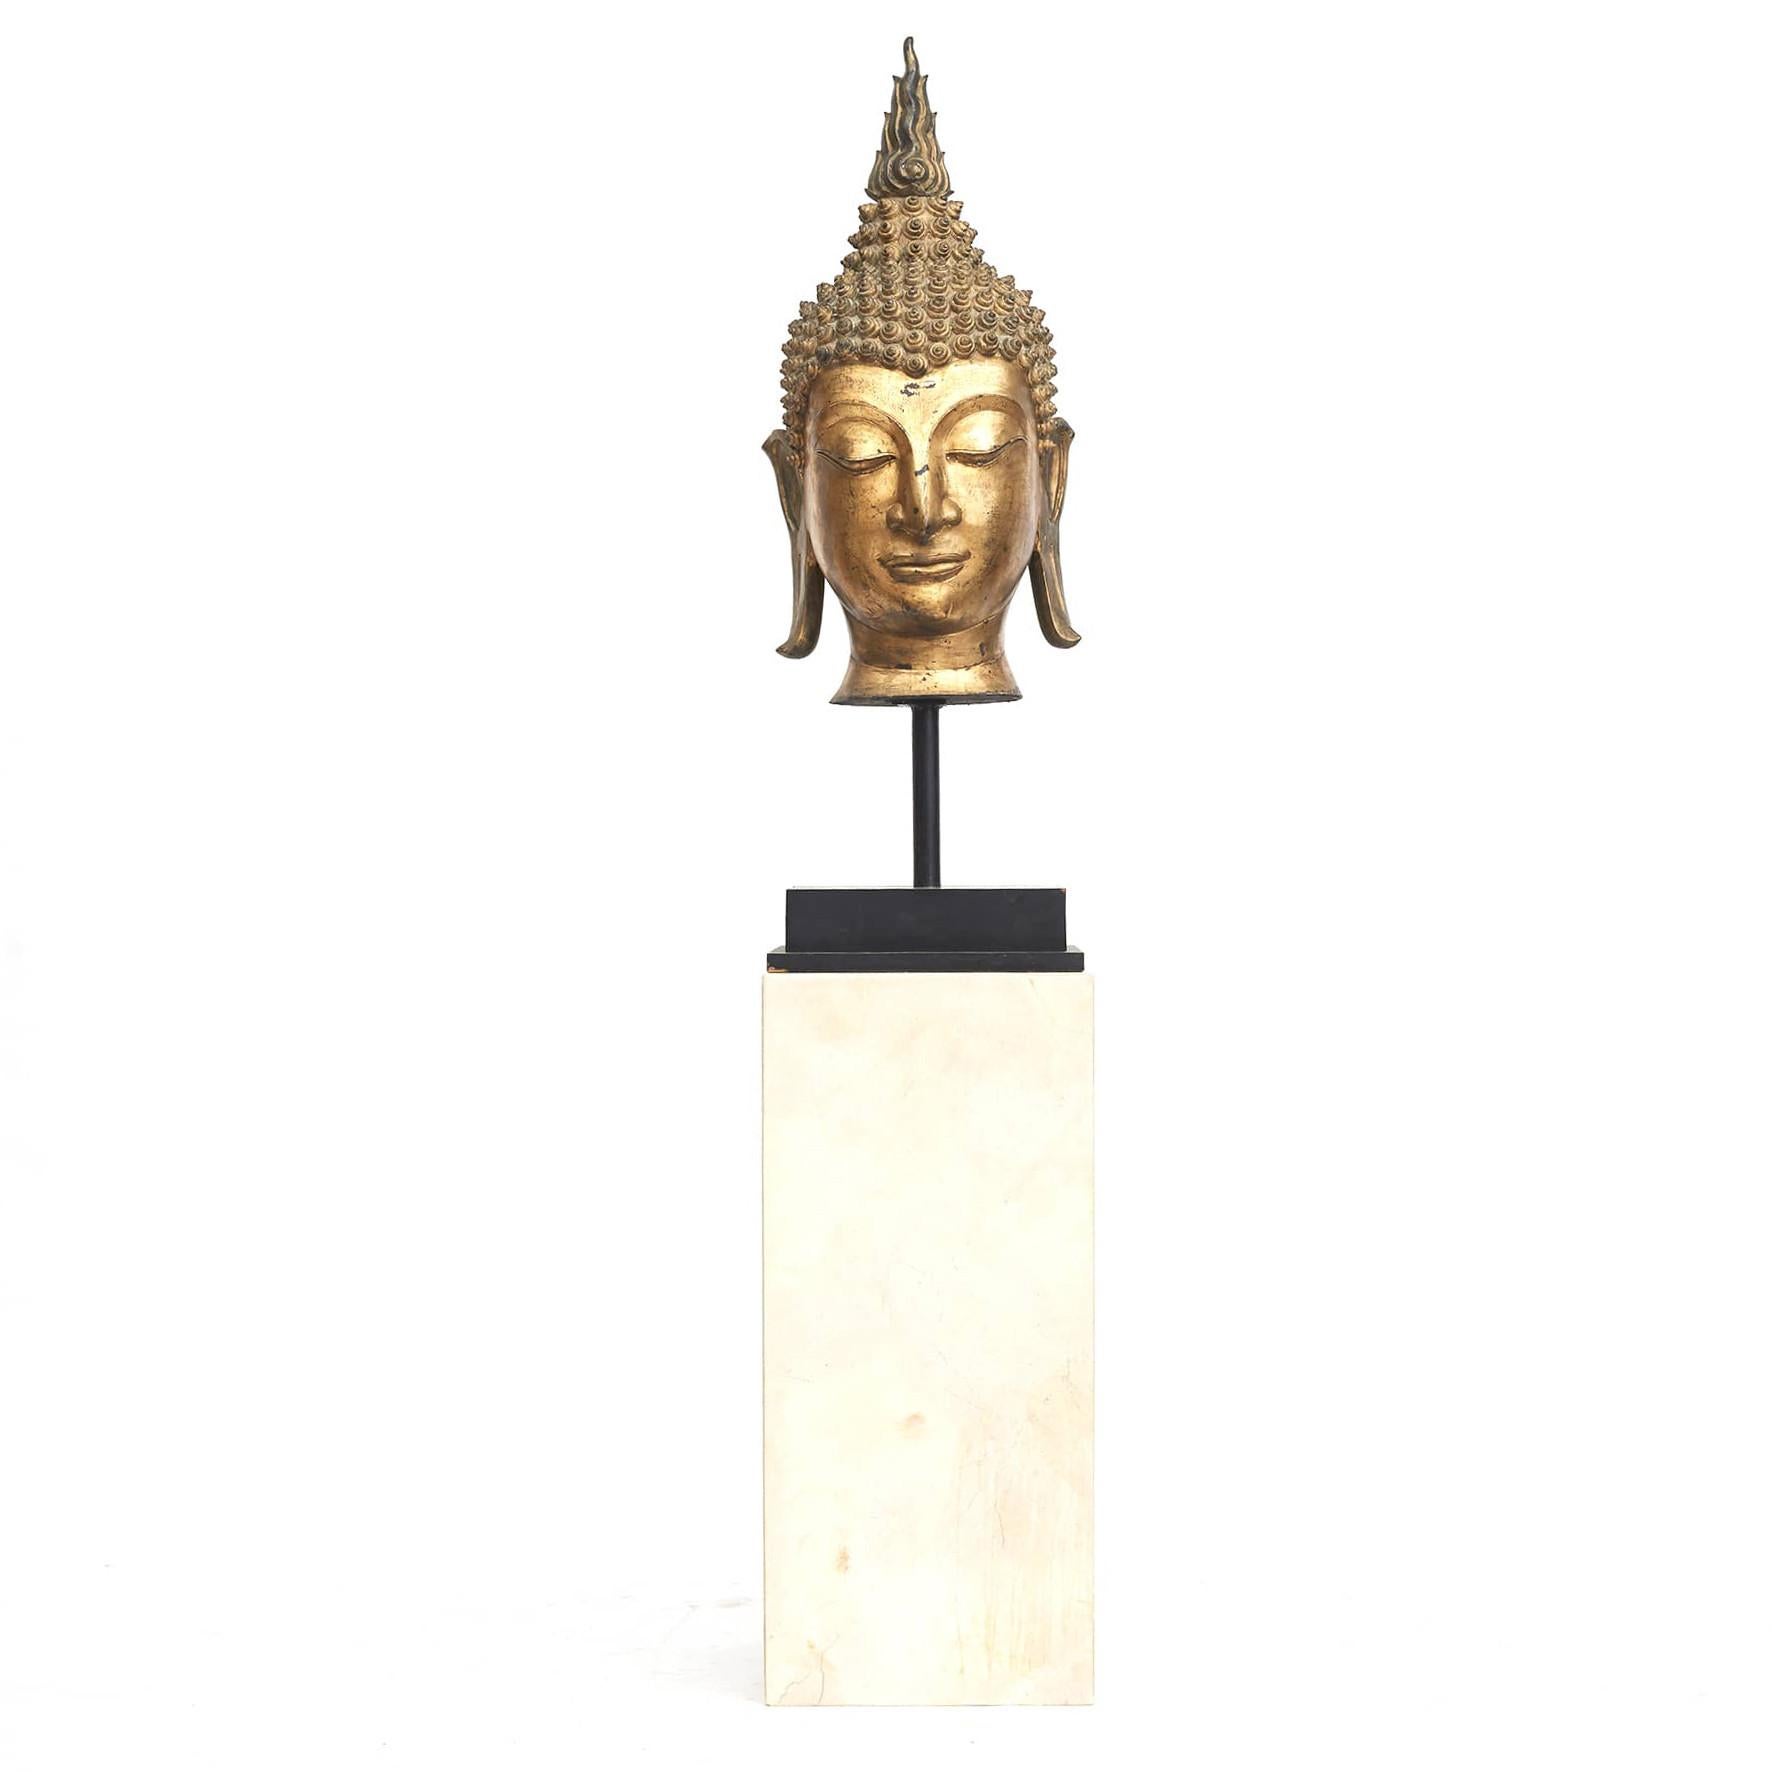 A large gilt bronze head of Buddha on black square base. Thailand c. 1900.
Decorative with good patina.

Measures: Height head: 96 cm.
Height incl. base: 135 cm.
Total height incl. plinth: 235 cm.